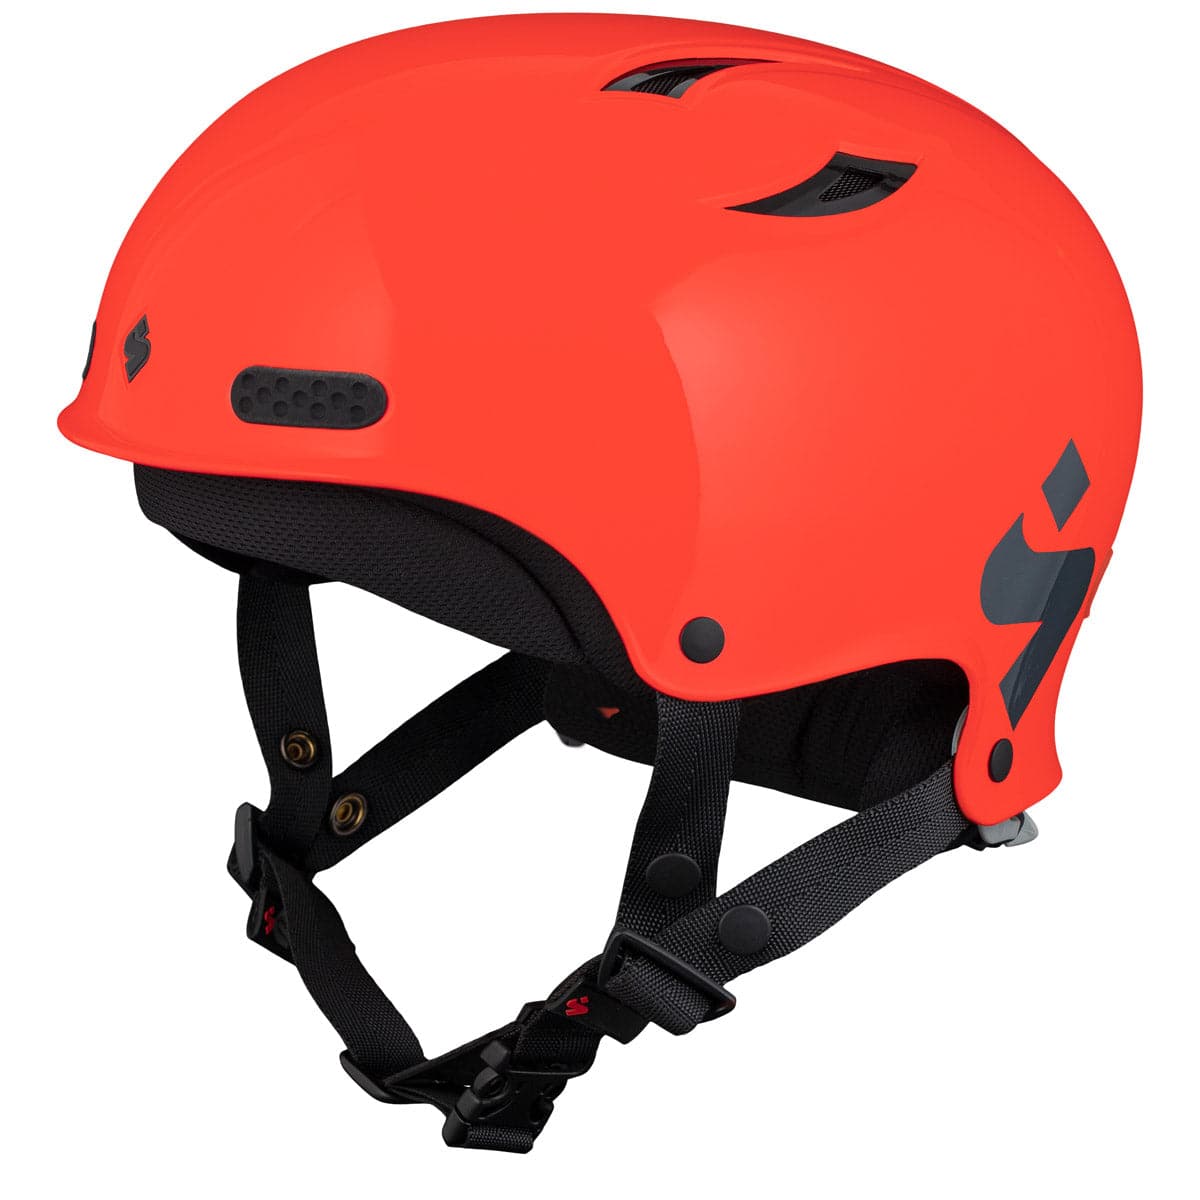 Featuring the Wanderer II Helmet helmet manufactured by Sweet shown here from a tenth angle.